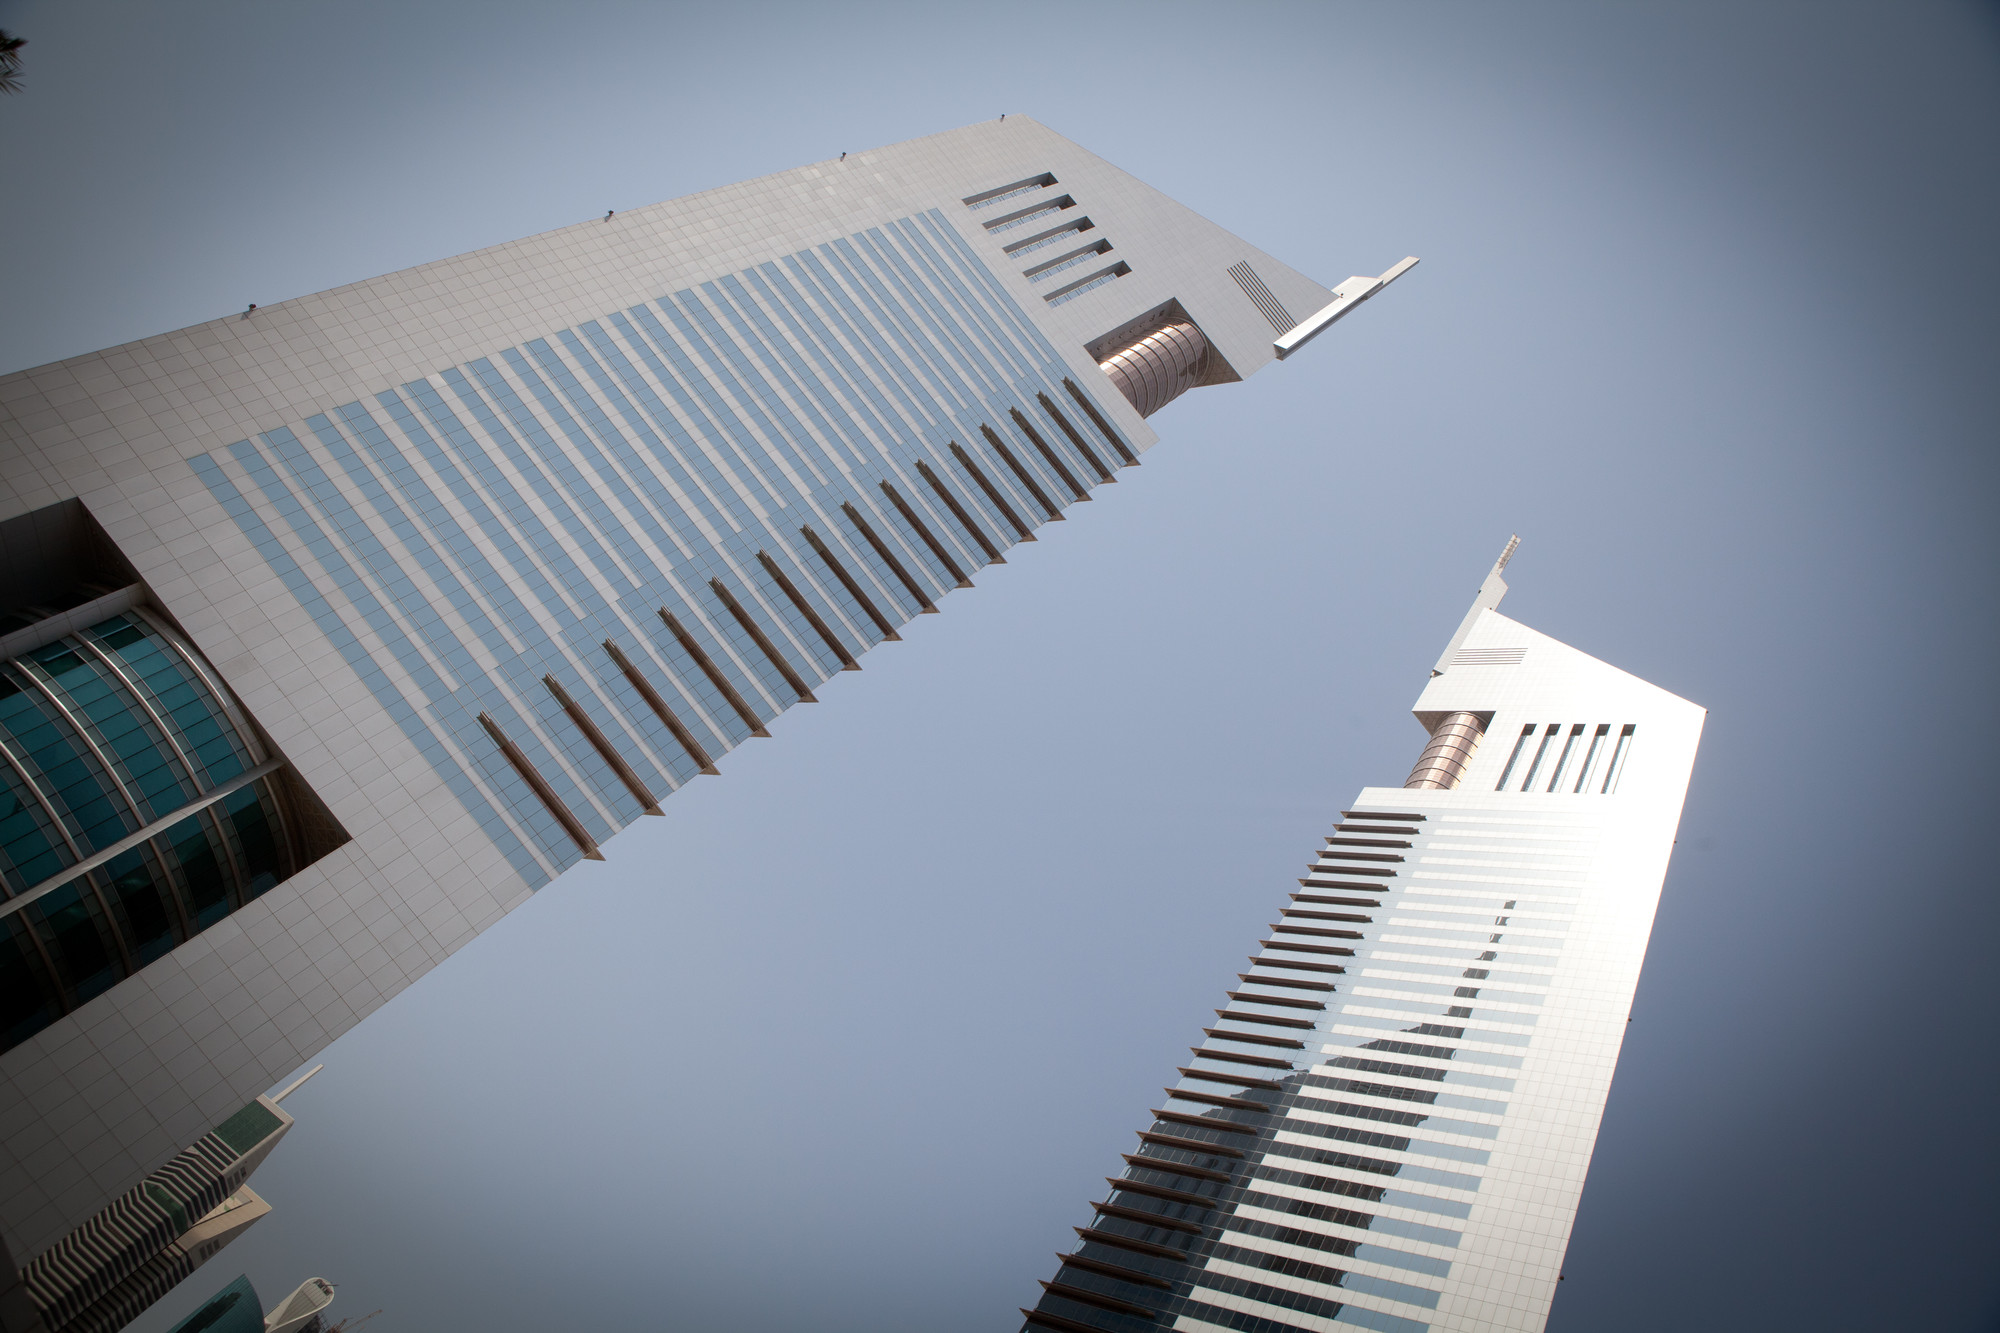 Two skyscapers in the Dubai skyline